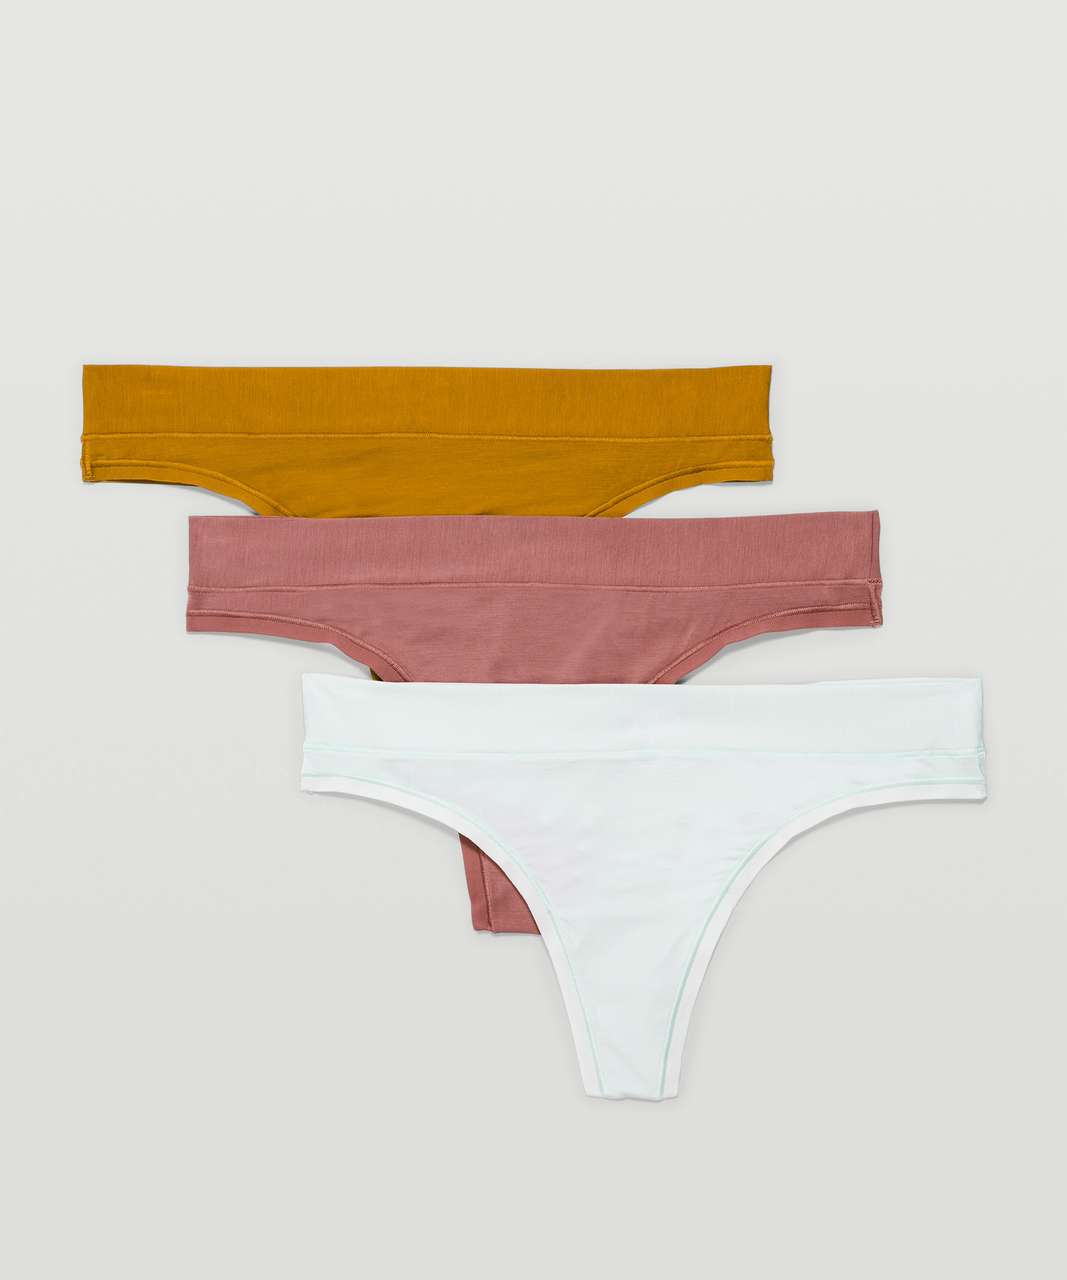 Lululemon UnderEase Mid Rise Thong Underwear 3 Pack - Ocean Air / Spiced Chai / Gold Spice